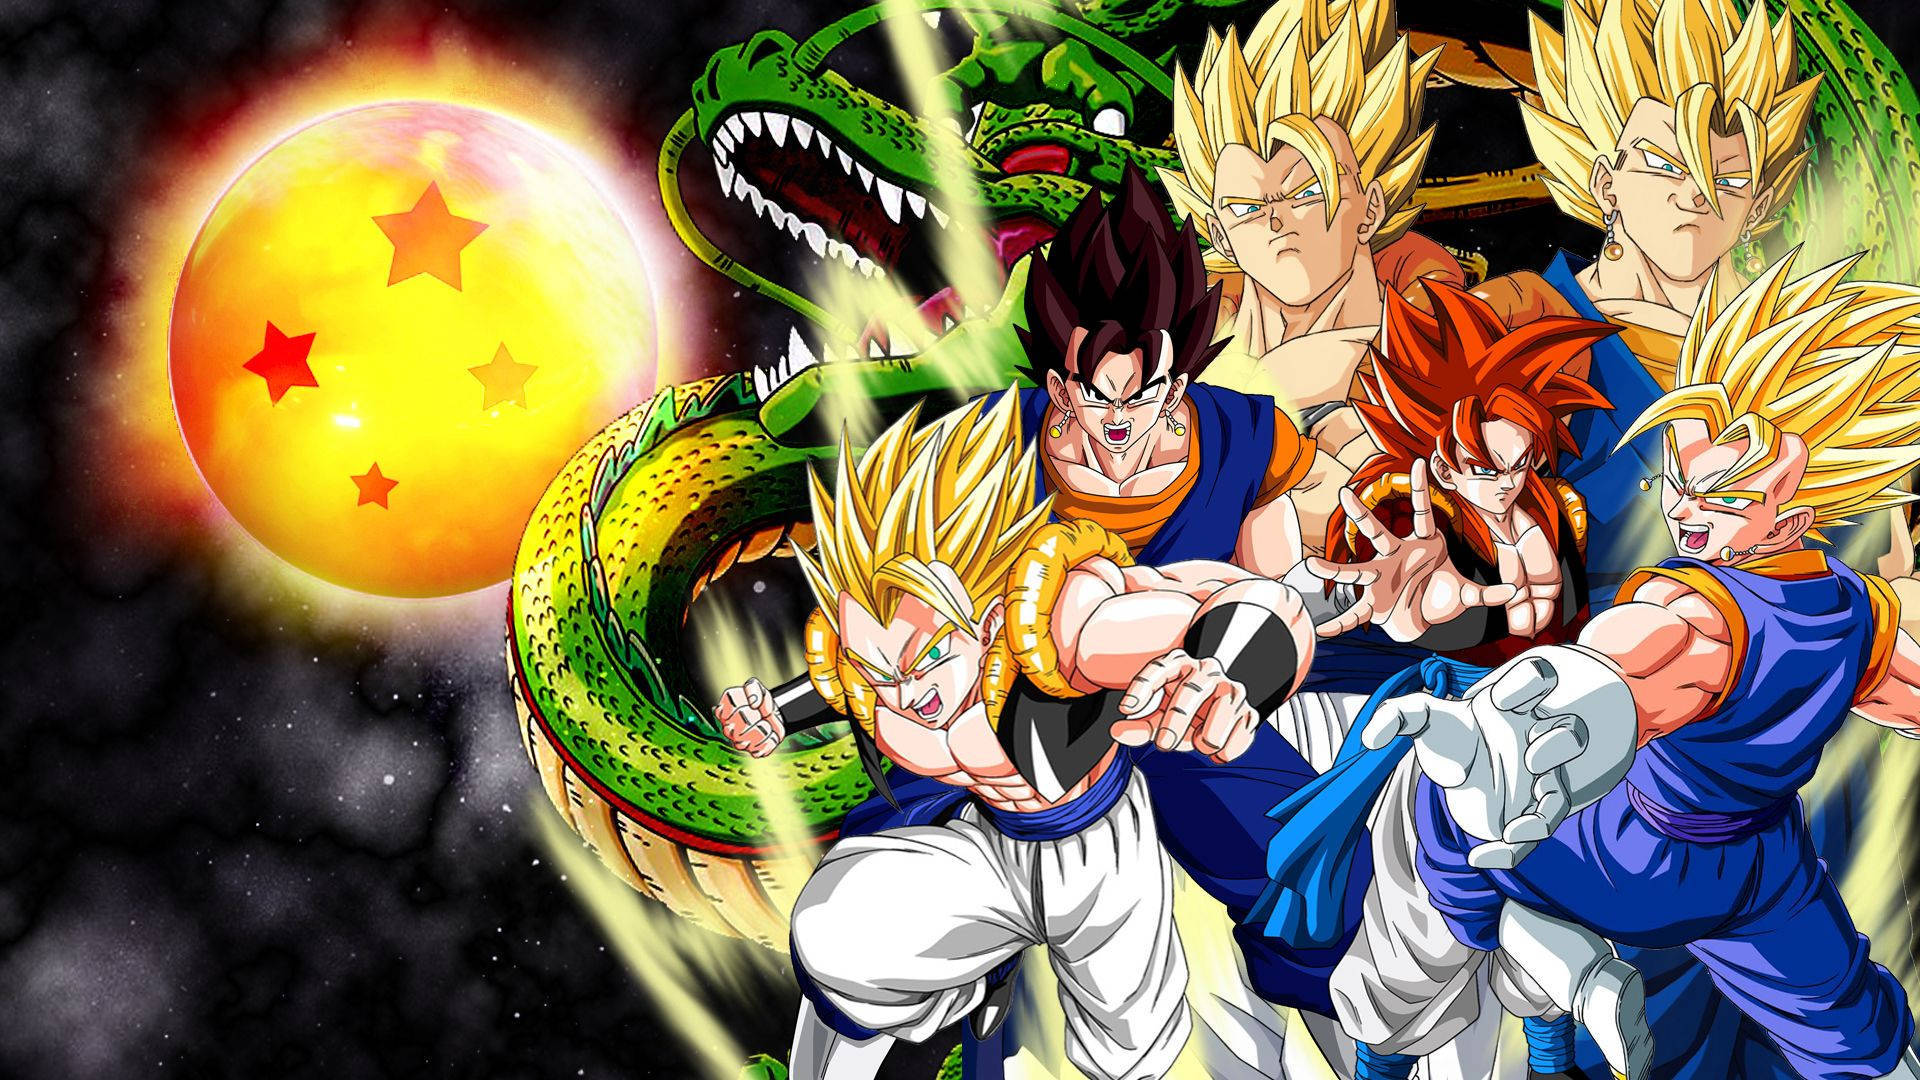 Unleash Your Hidden Powers With Cool Dragon Ball Z! Background